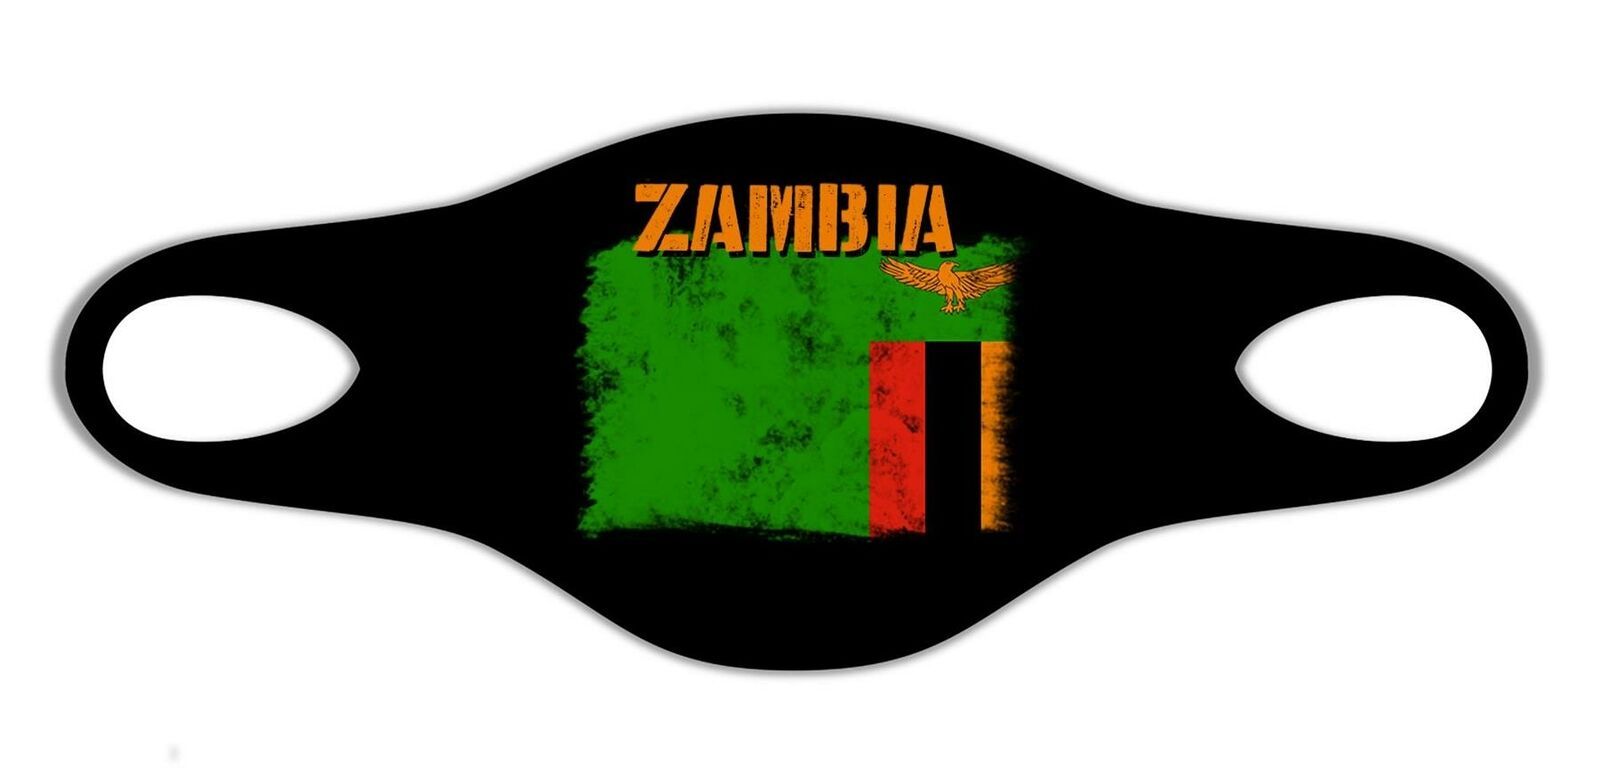 Zambia National Flag Soft Face Mask Protective Reusable washable Breathable